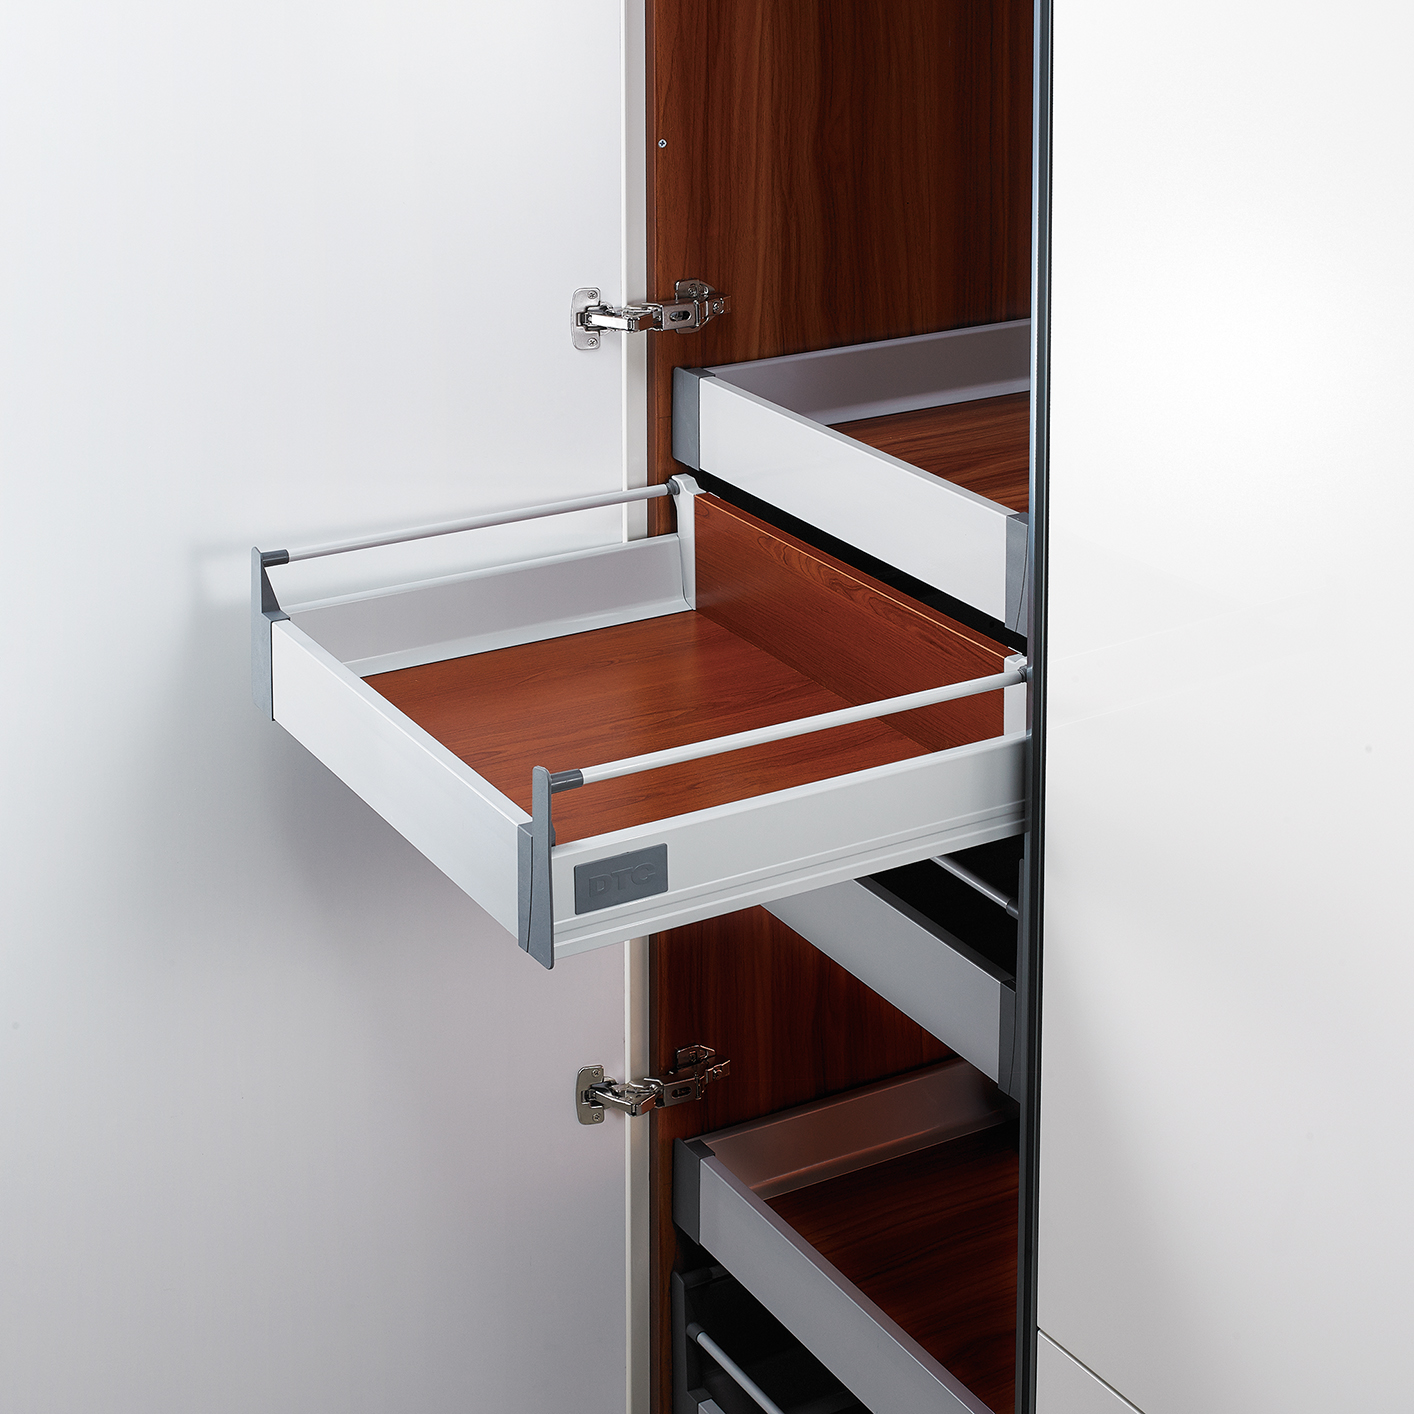 Doublewall Deep Drawer - Internal, Regular Boxside with 1 Round Rail, 83 mm Drawer Height